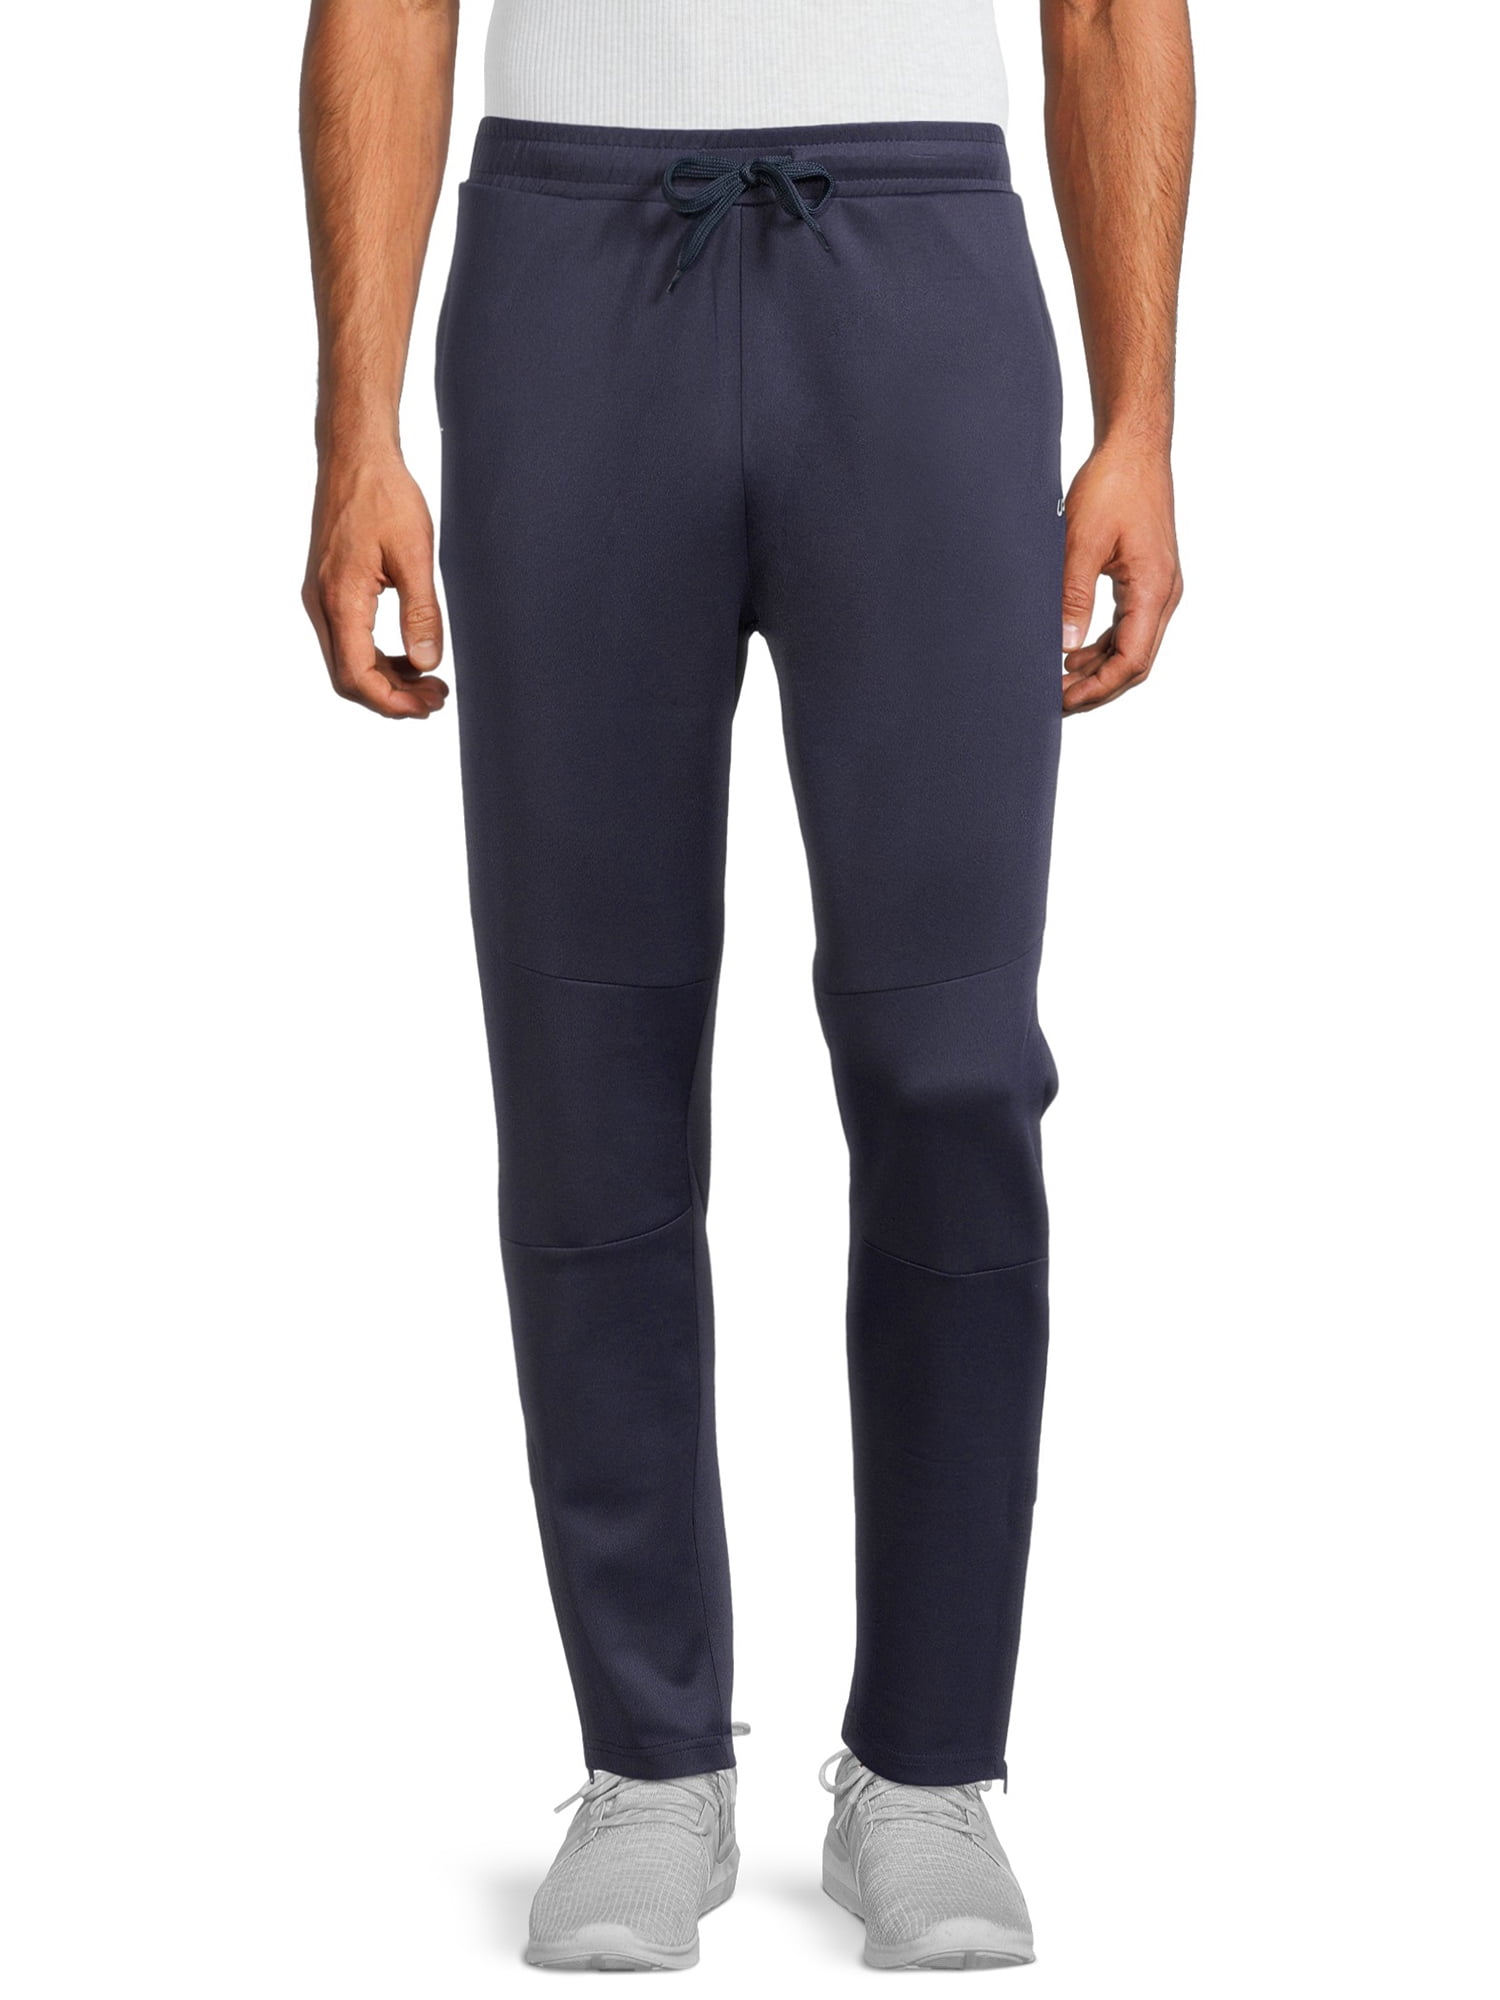 Unipro Men's Active Lightweight French Terry Solid Joggers - Walmart.com